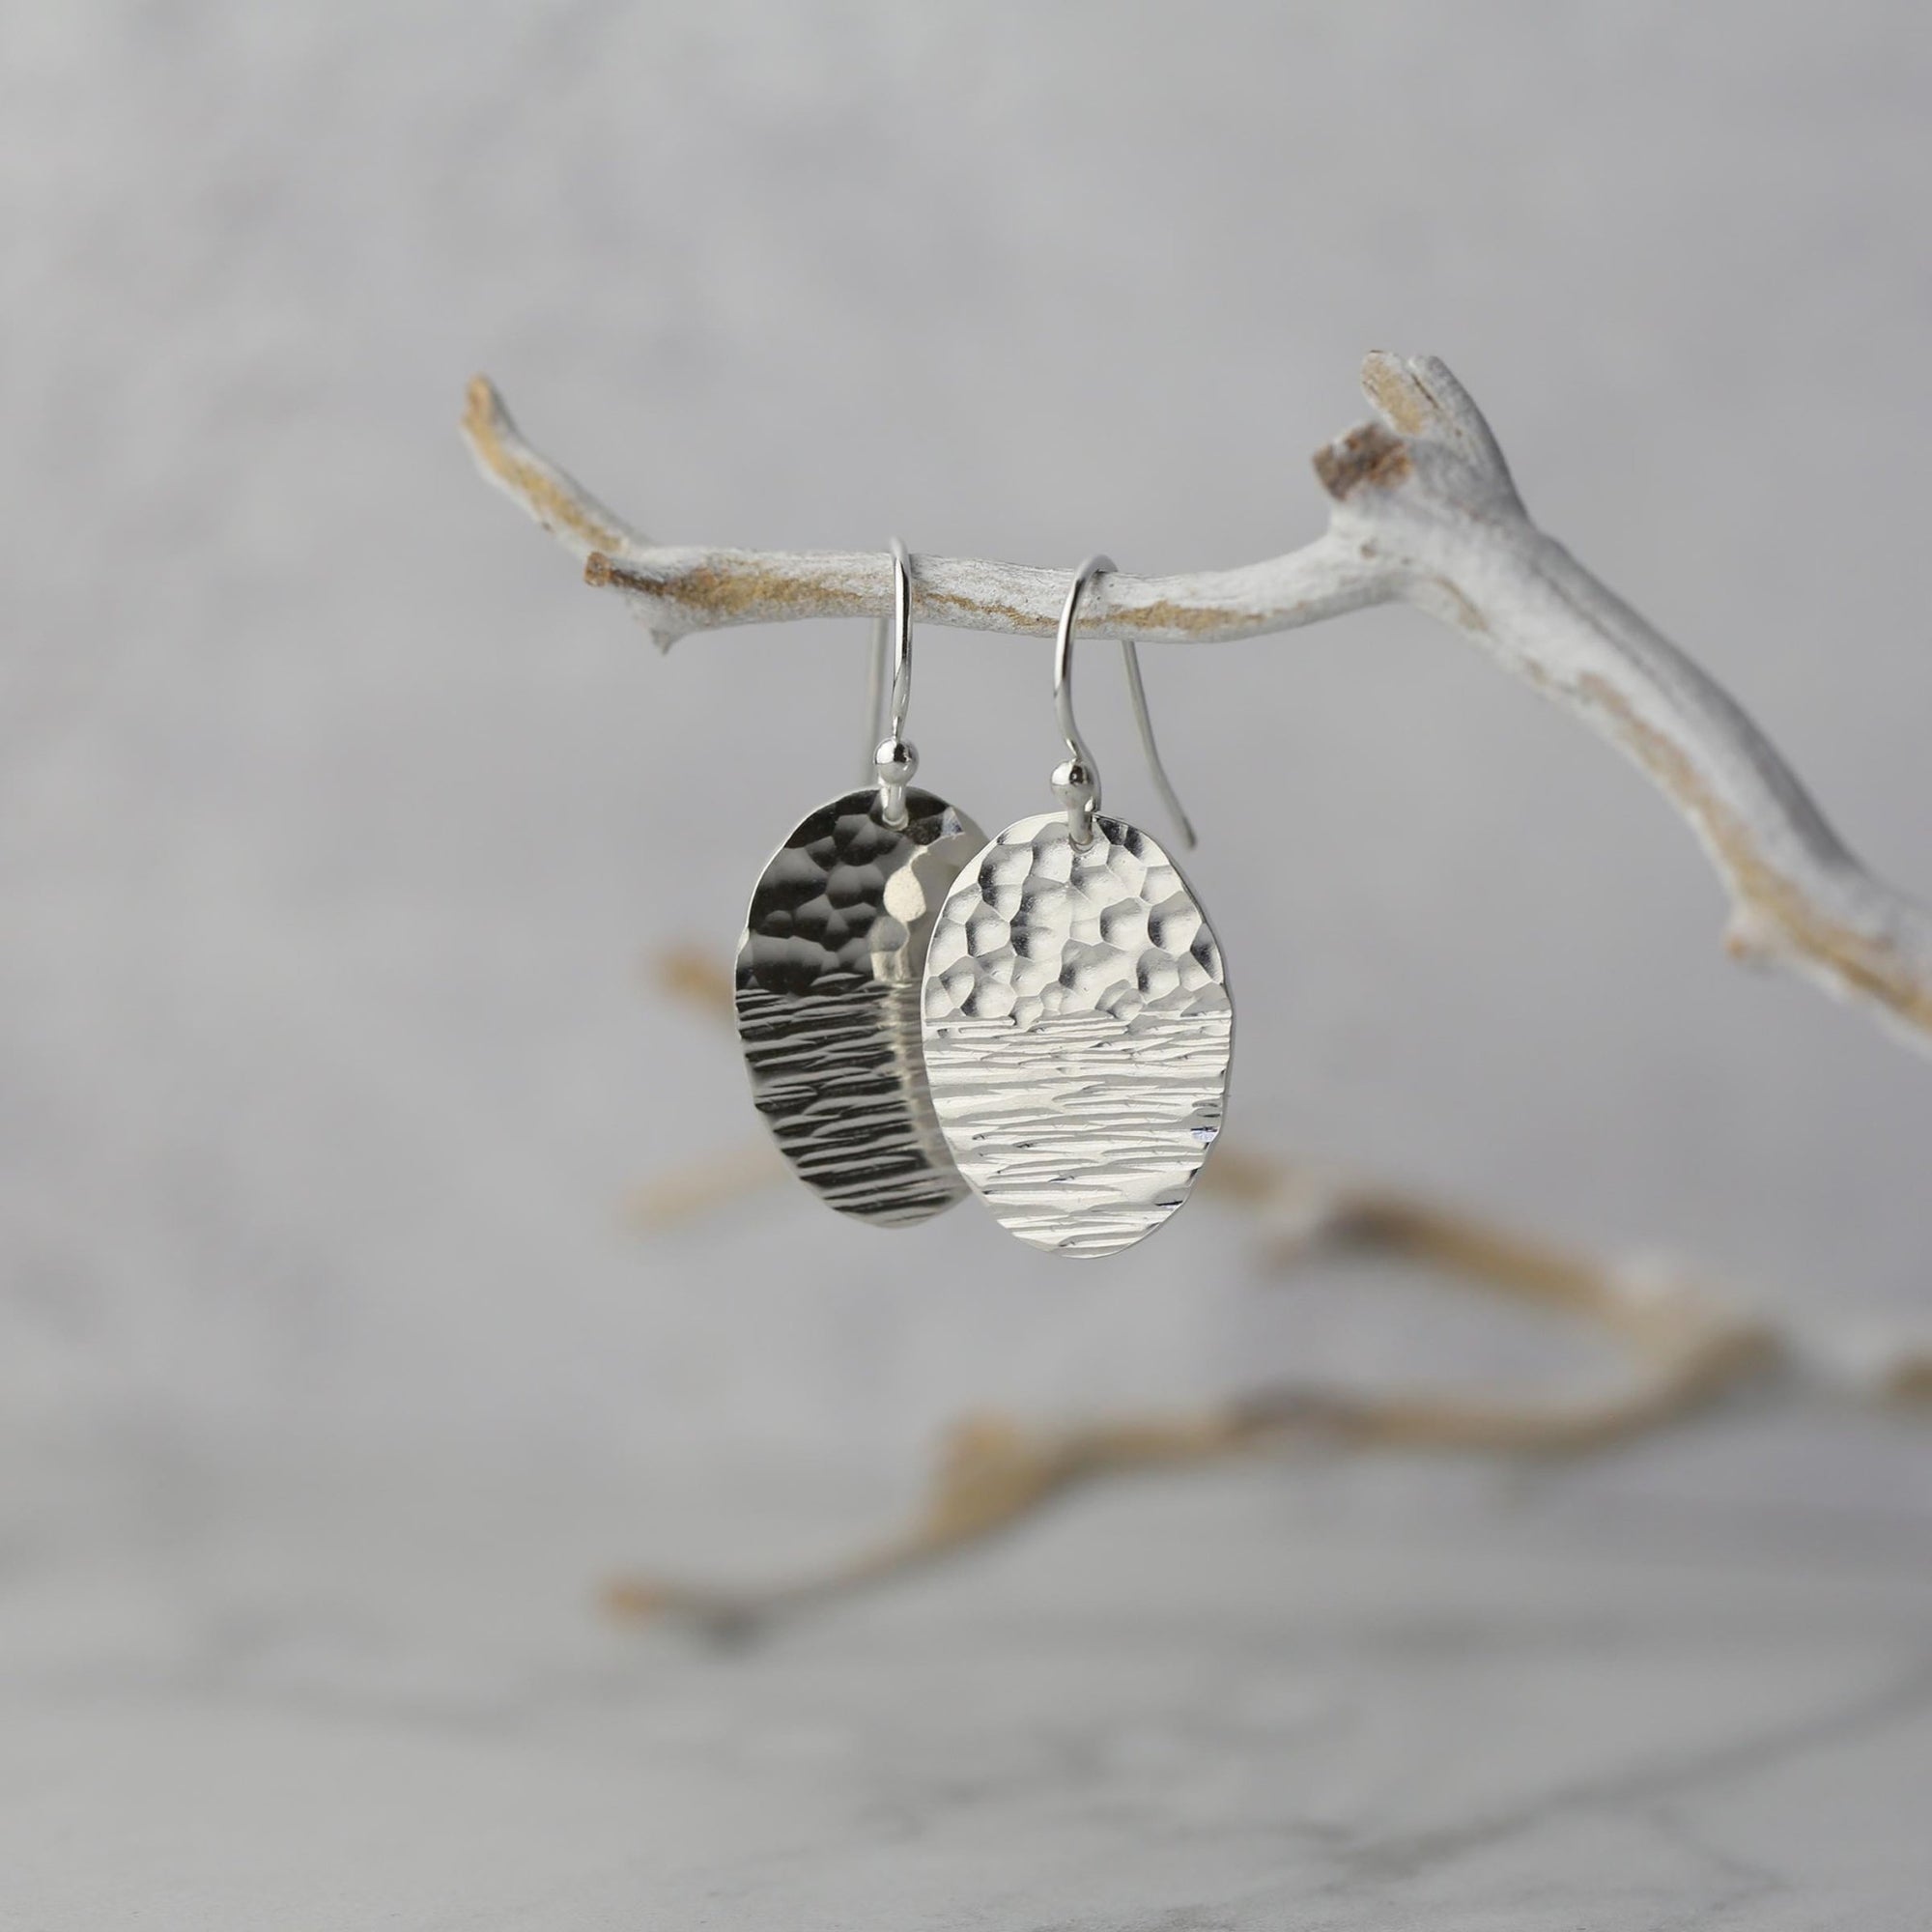 Duo Textured Silver Oval Earrings handmade by Burnish